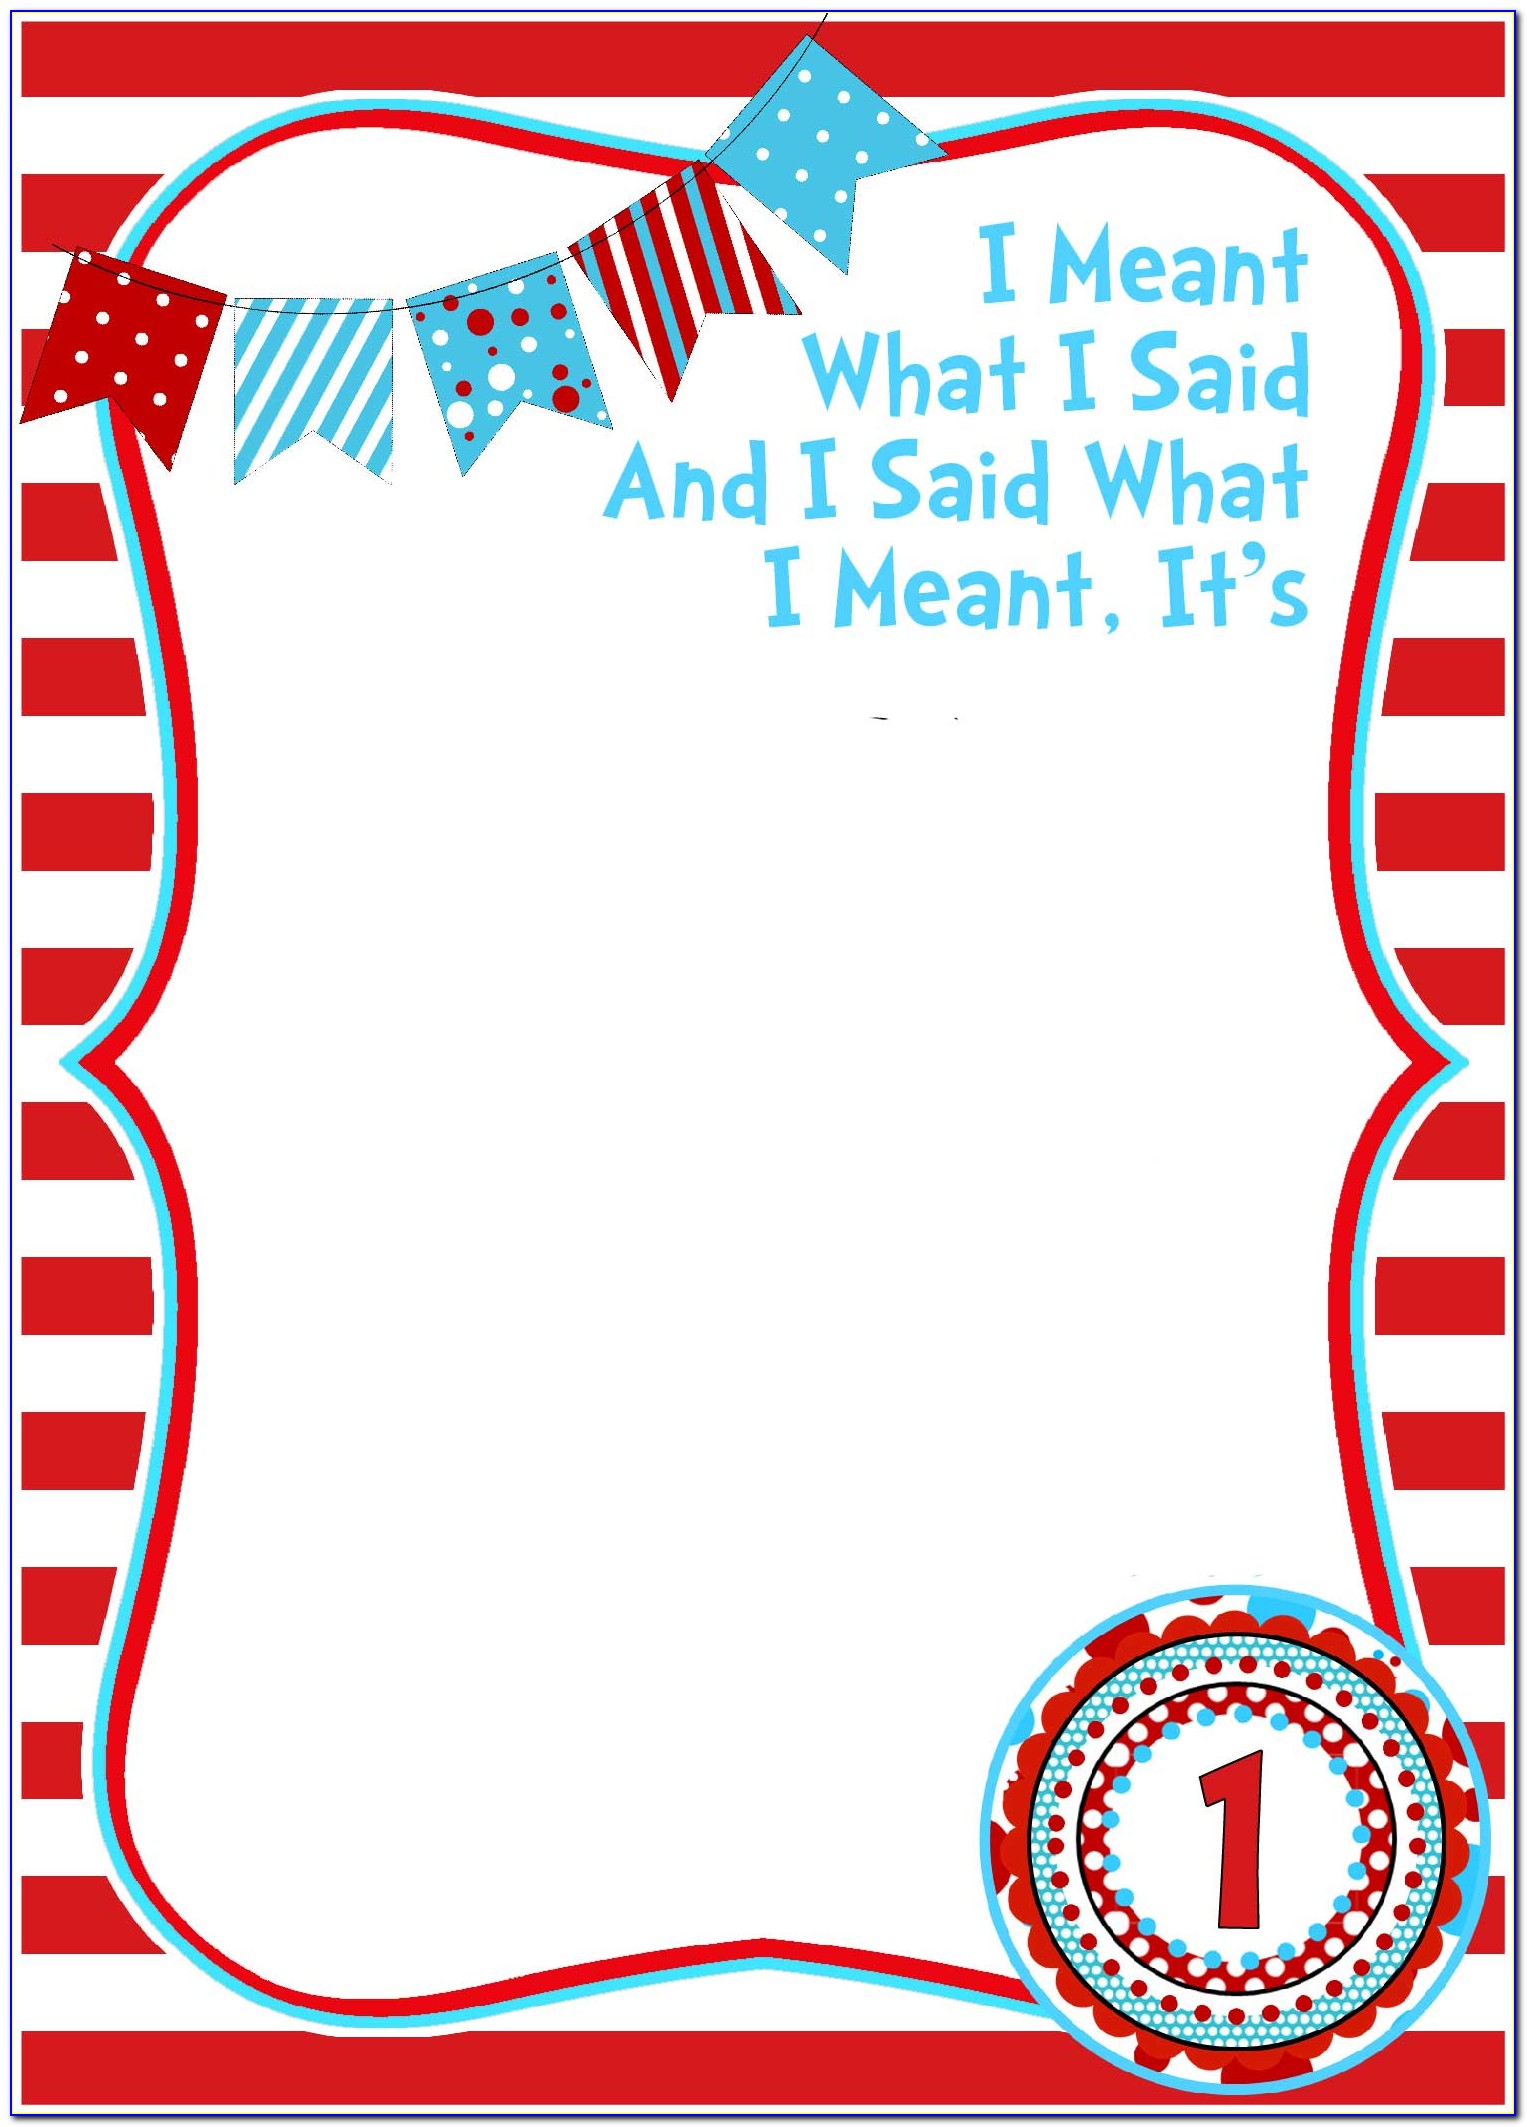 Cat In The Hat Birthday Party Invitations